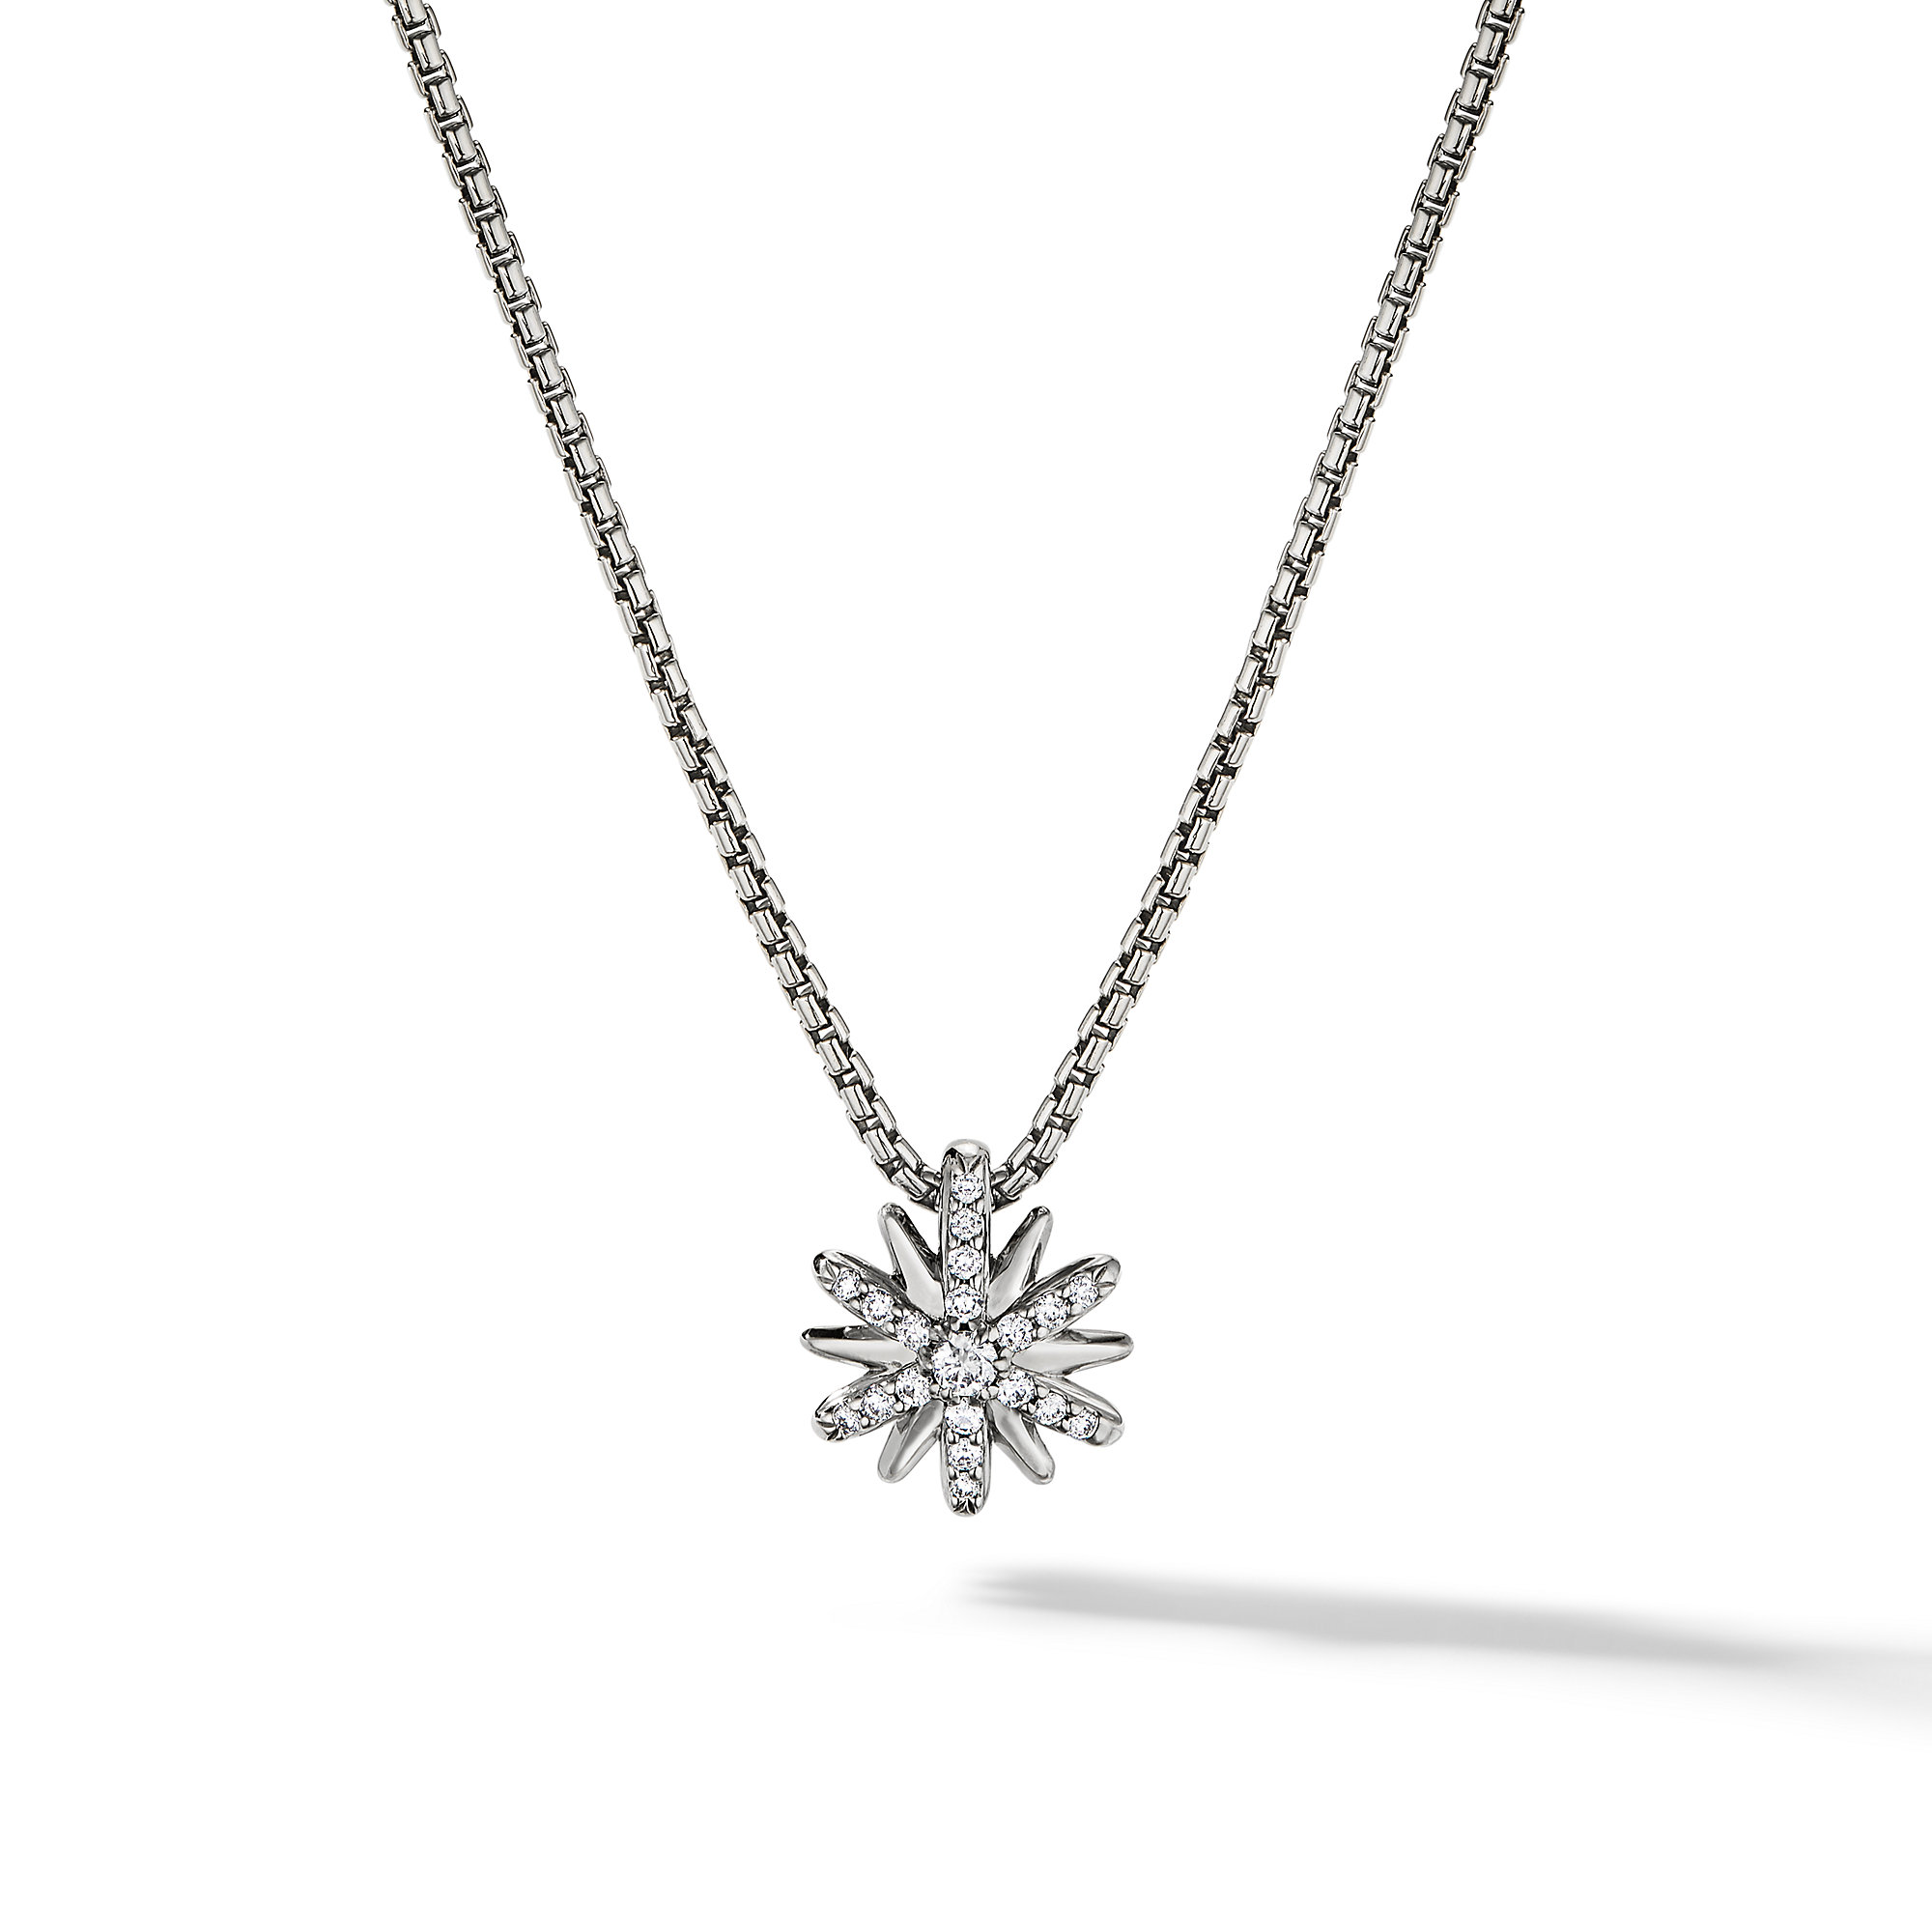 Petite Starburst Pendant Necklace in Sterling Silver with Pave Diamonds